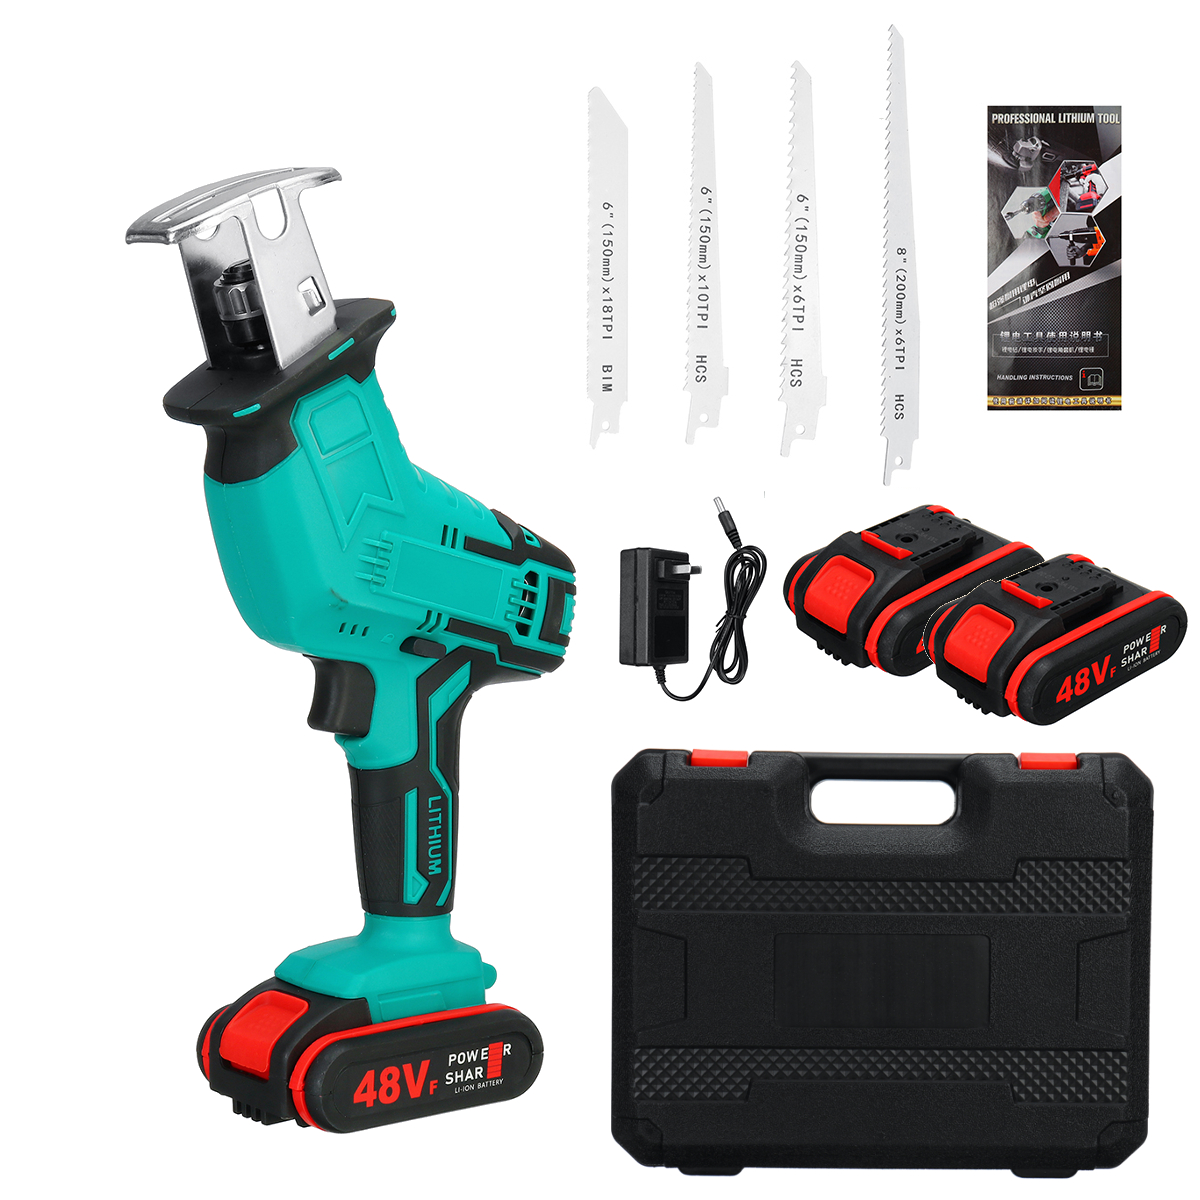 48V-Cordless-Reciprocating-Saw-With-Battery-Charger-recip-Sabre-Saw-New-Power-Tool-1734472-13